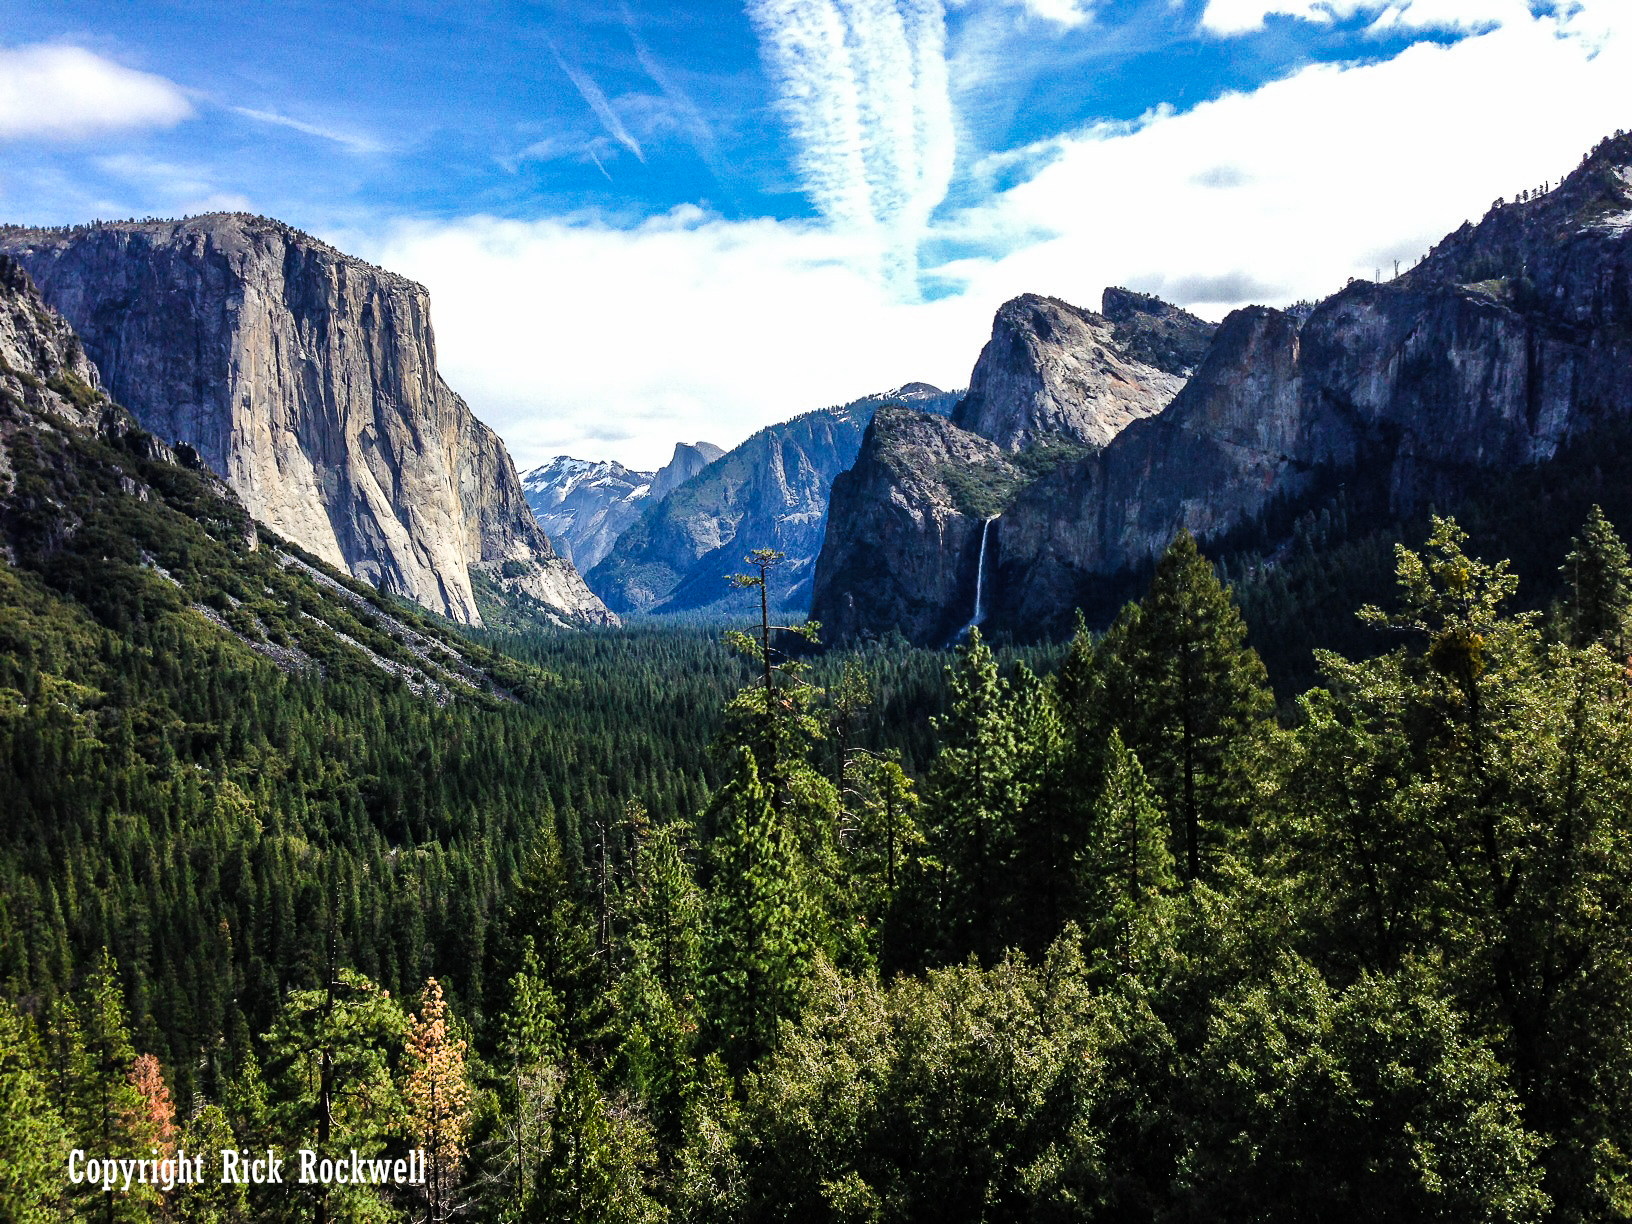 Photo of 2016 schedule: Free Entrance Days for California’s National Parks